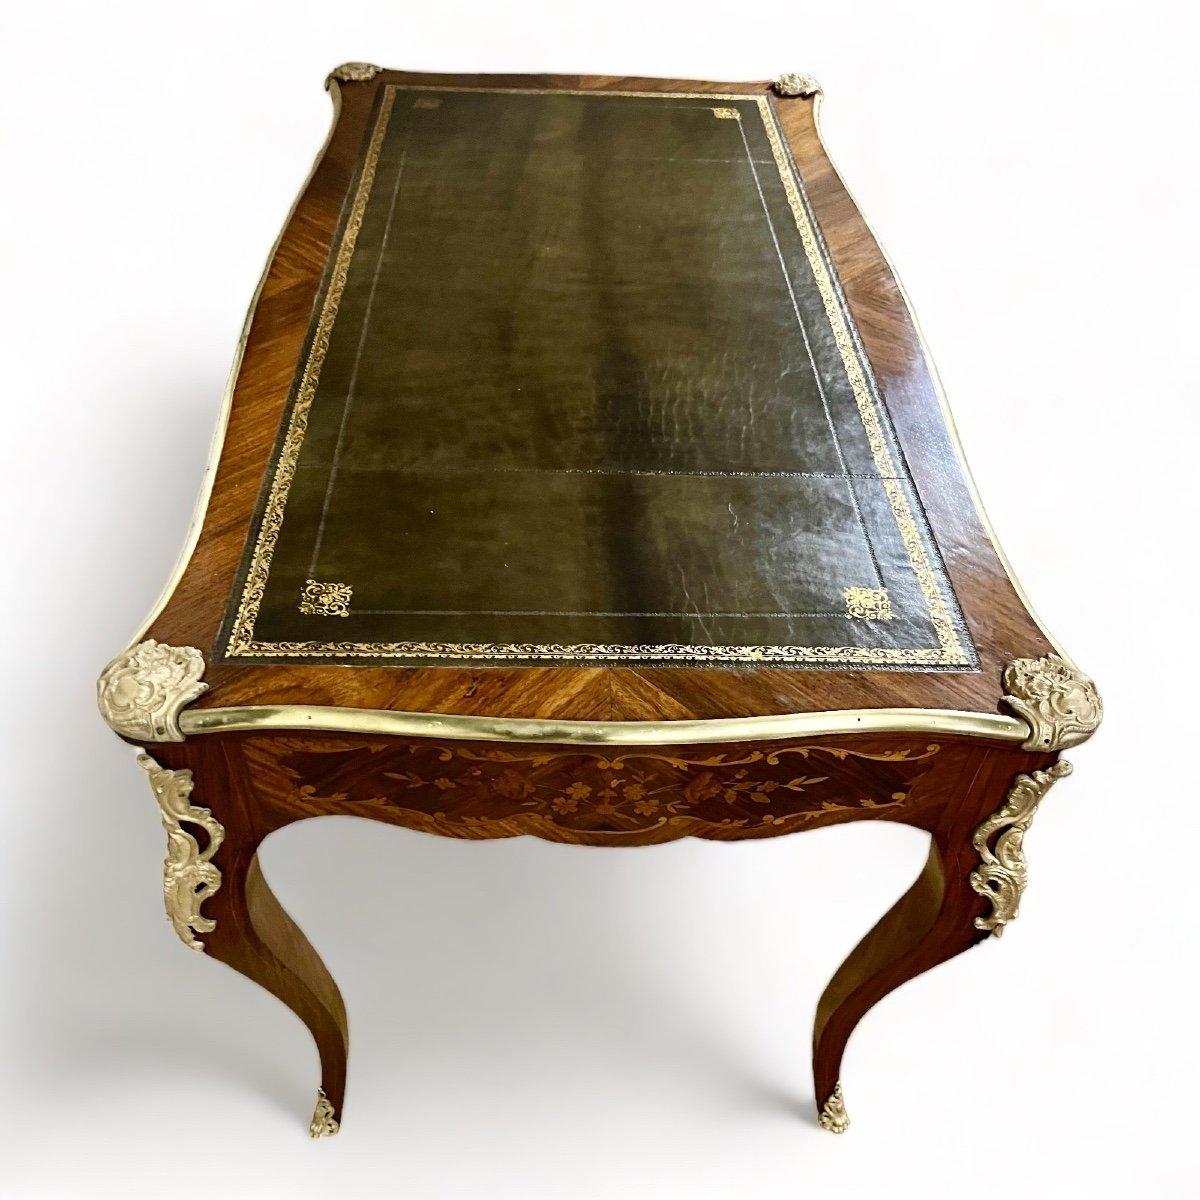 19th Century Louis XV-Style Marquetry Desk with Gilt Bronze Accents For Sale 1